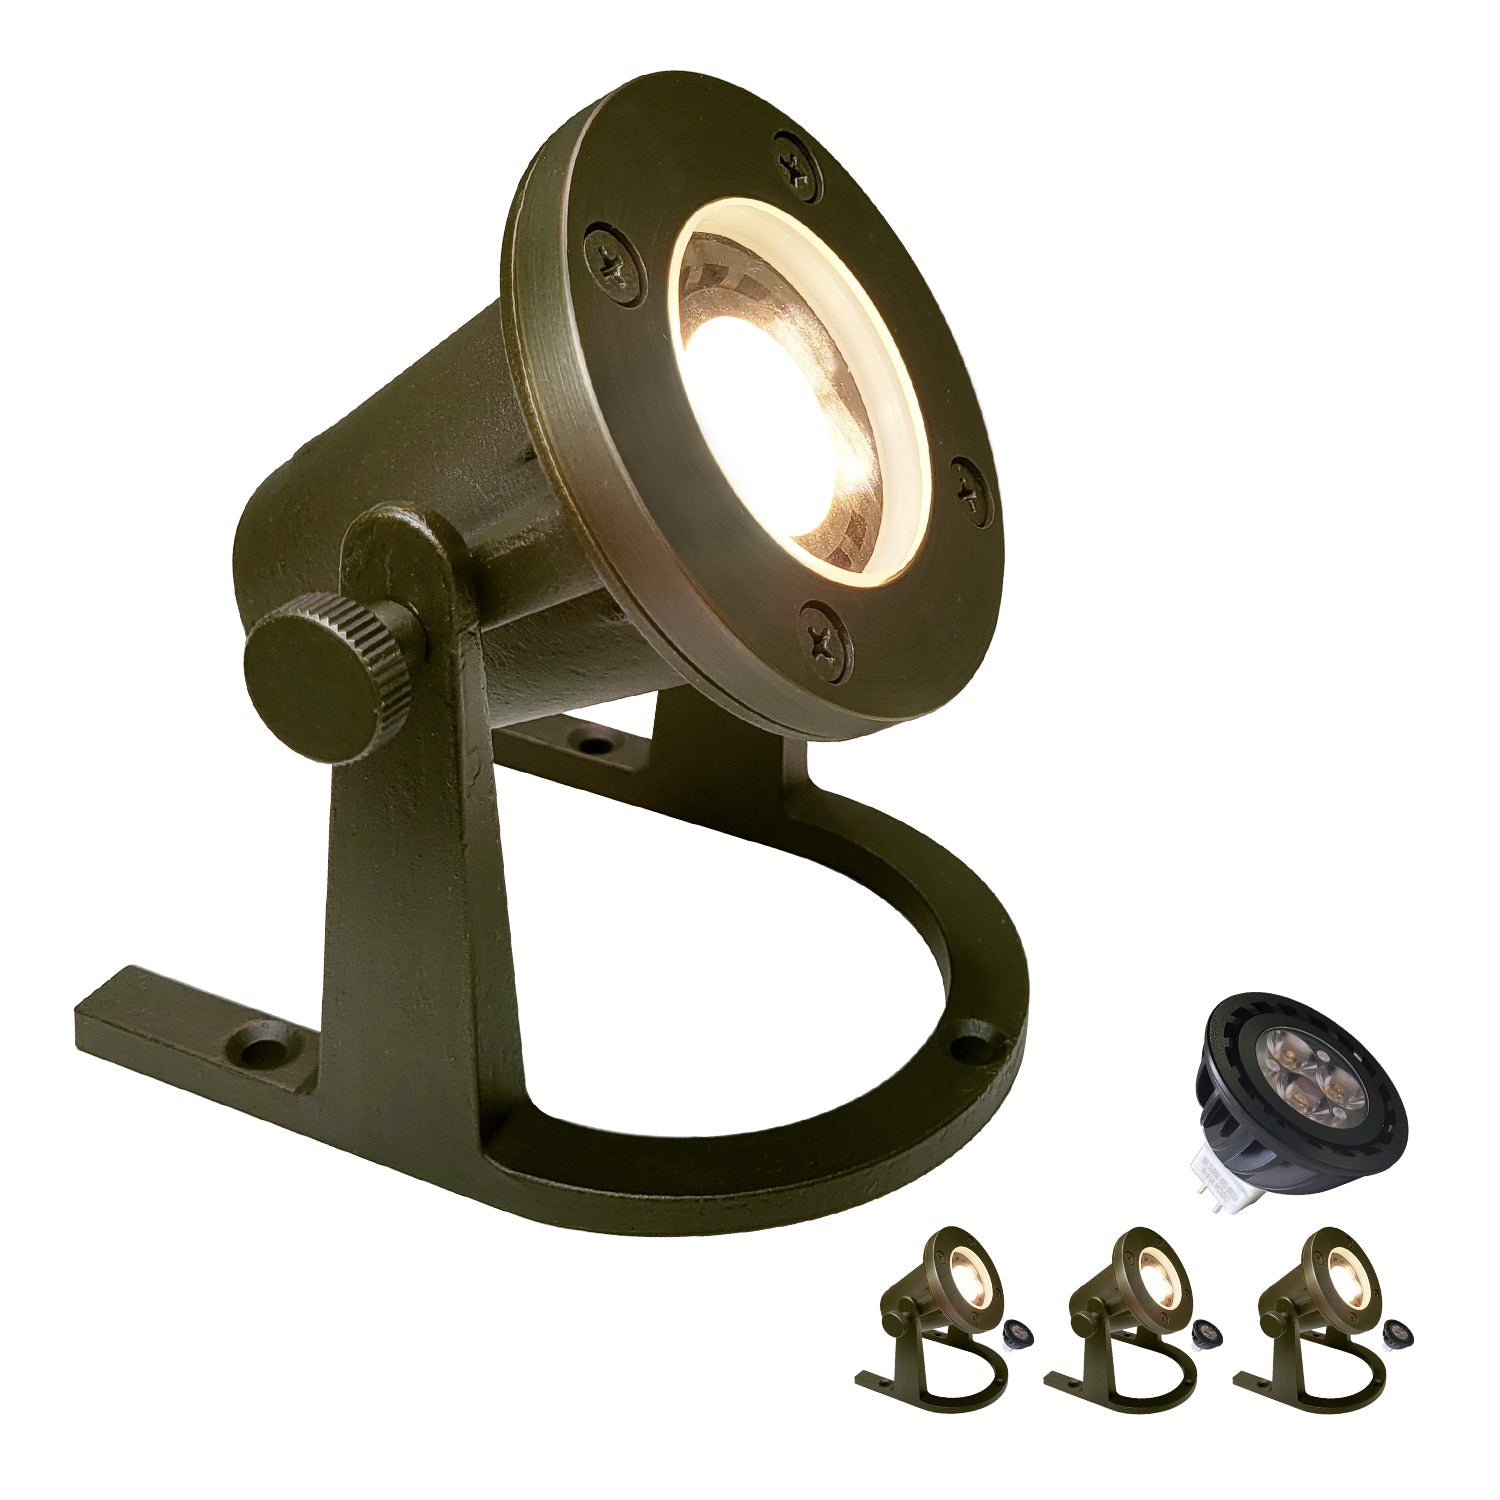 Brass underwater landscape lighting for pools and fountains, COU1201B model with accessories.